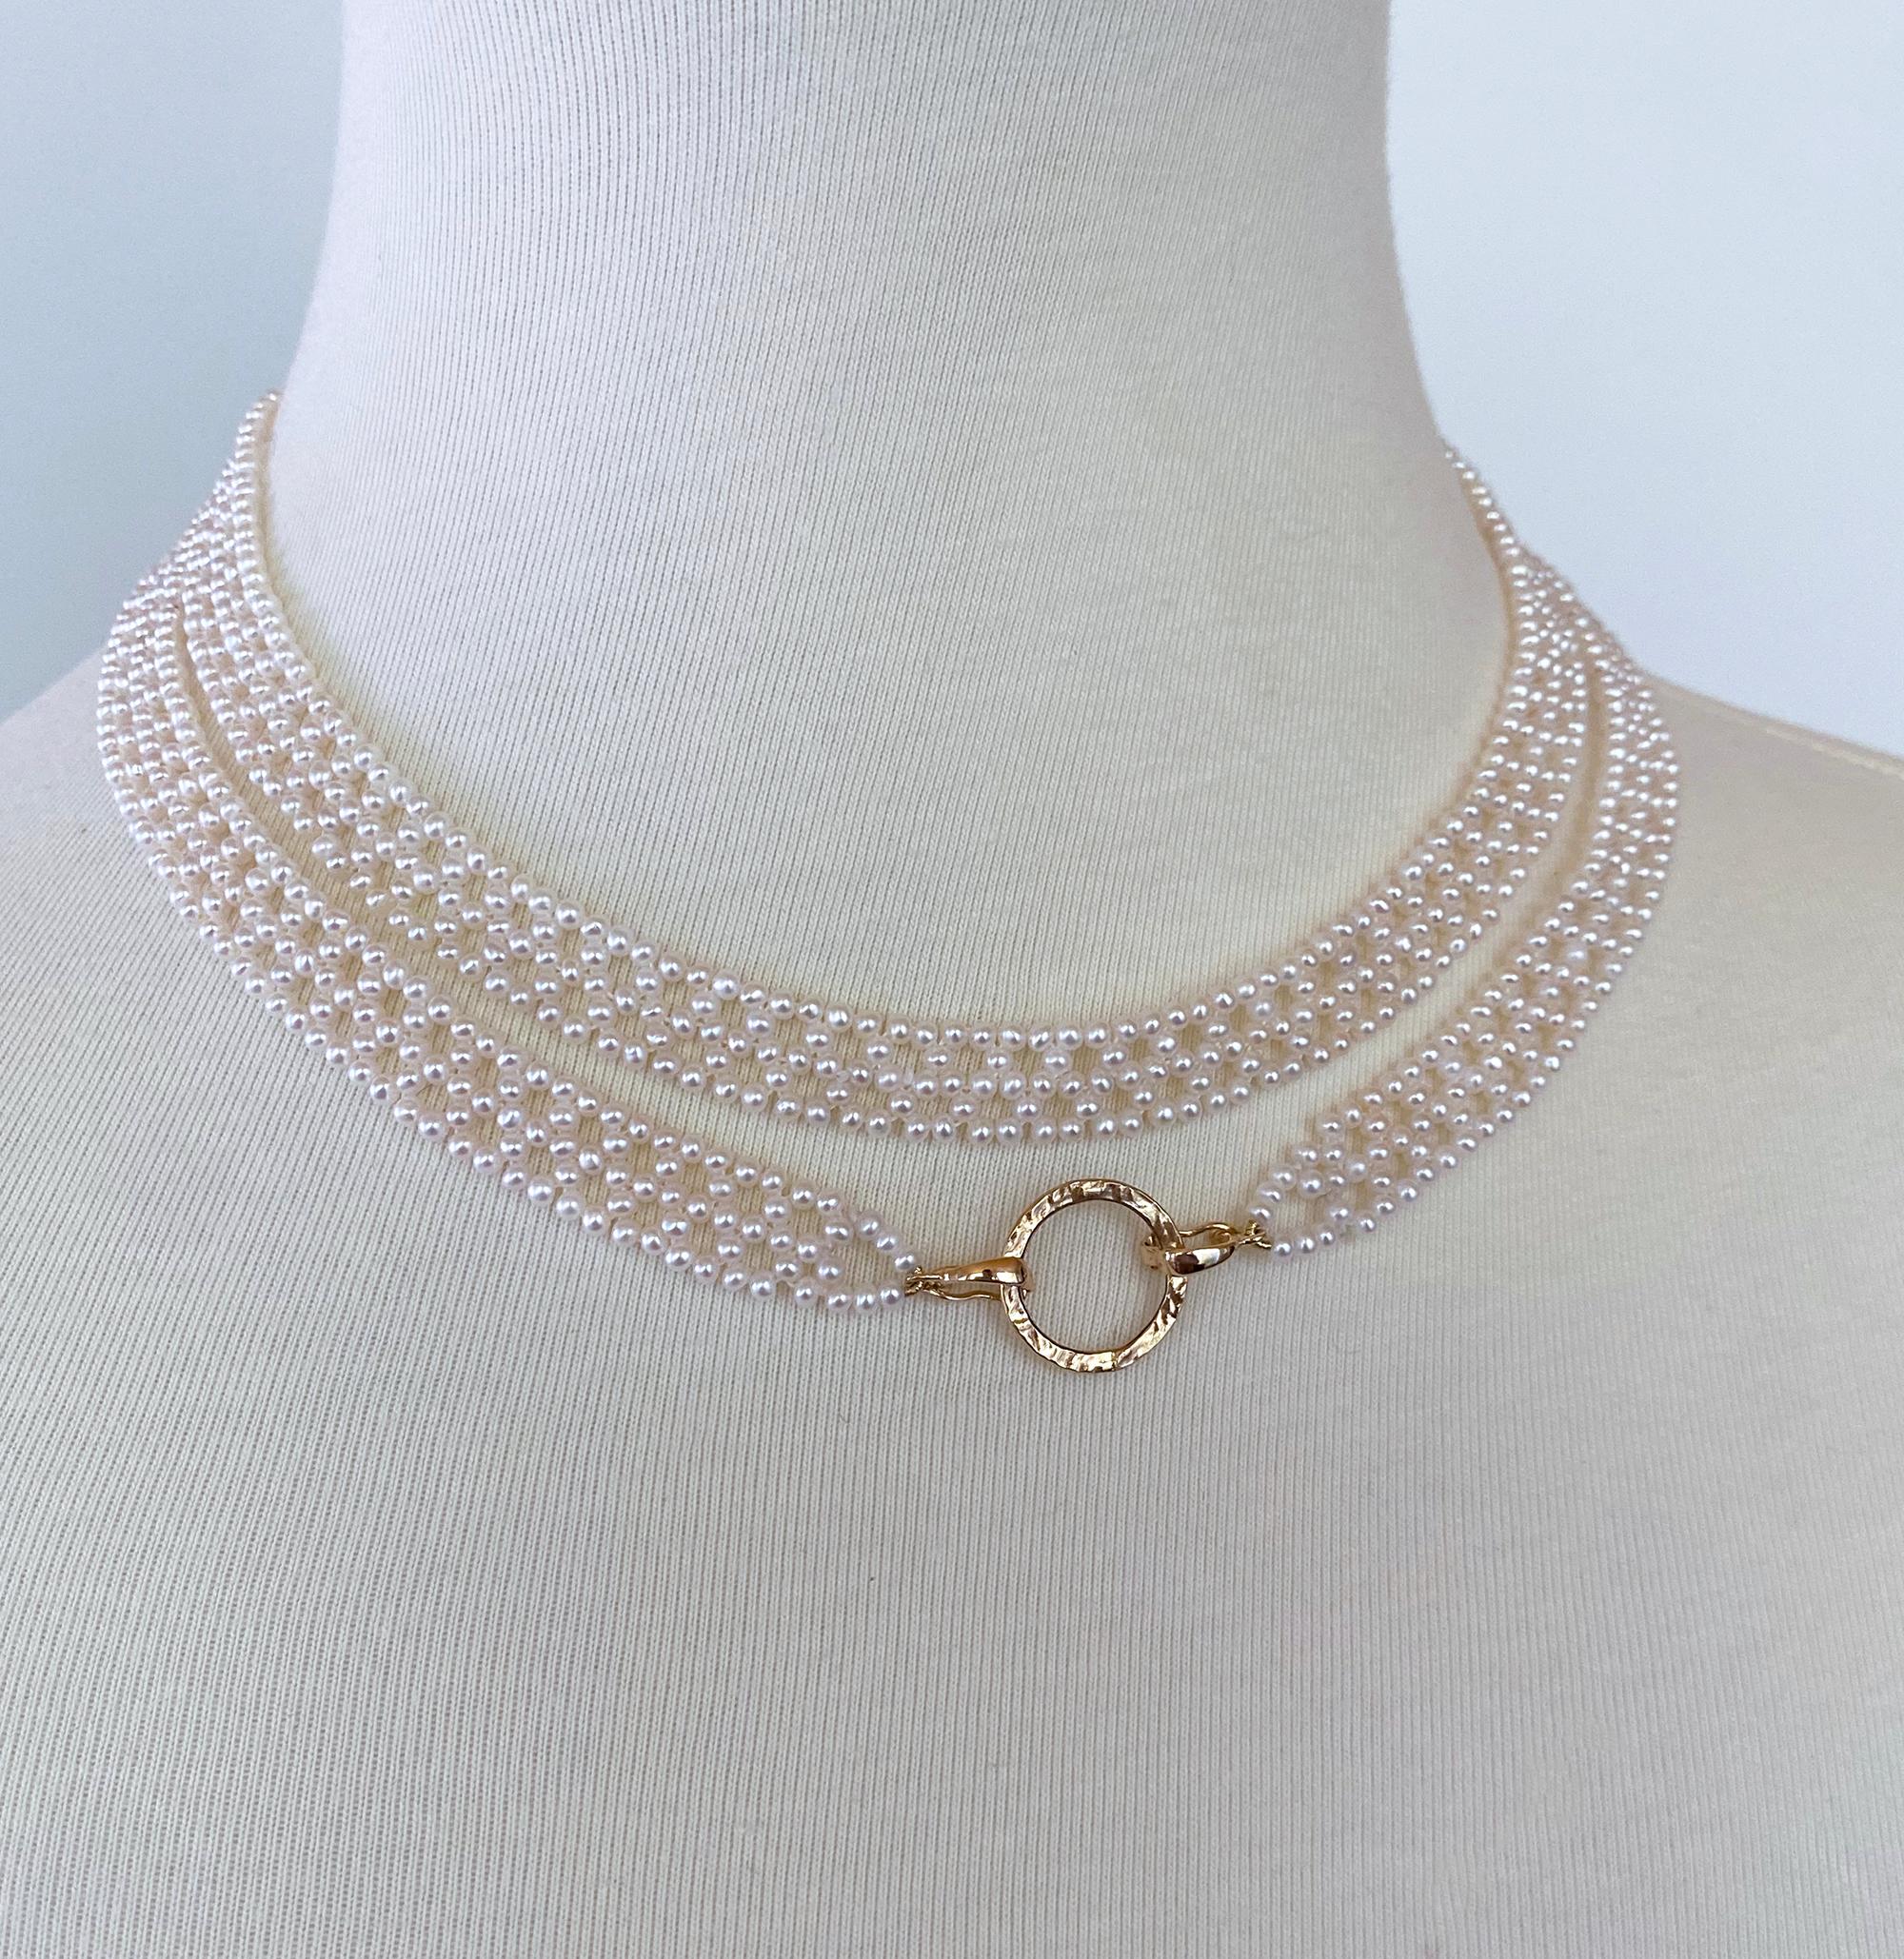 Stunning and classic piece by Marina J. This Sautoir is made of all cultured Seed Pearls intricately woven together into a fine lace like design. The weaving on this piece is inspired by old Victorian Lace, giving this piece an elegant feel.